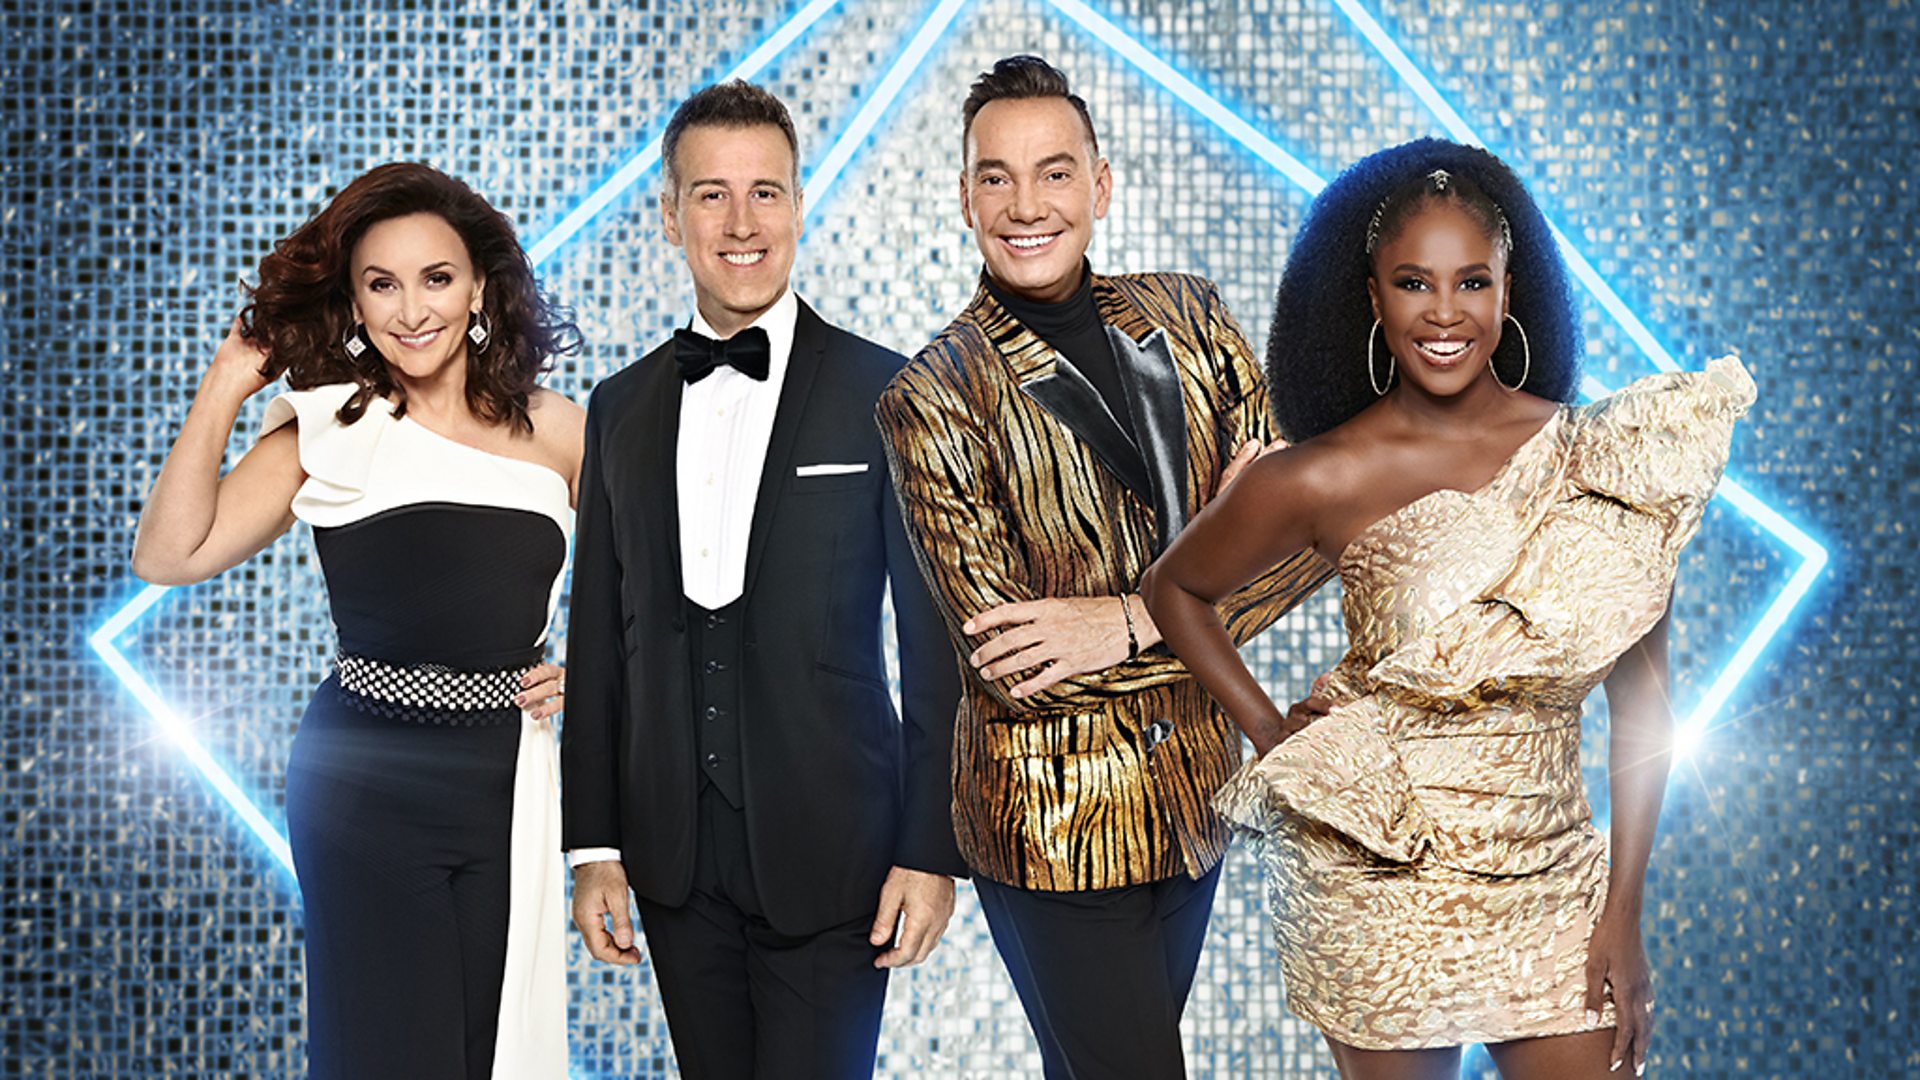 Judges Revealed For 22 Series Of Strictly Come Dancing Media Centre